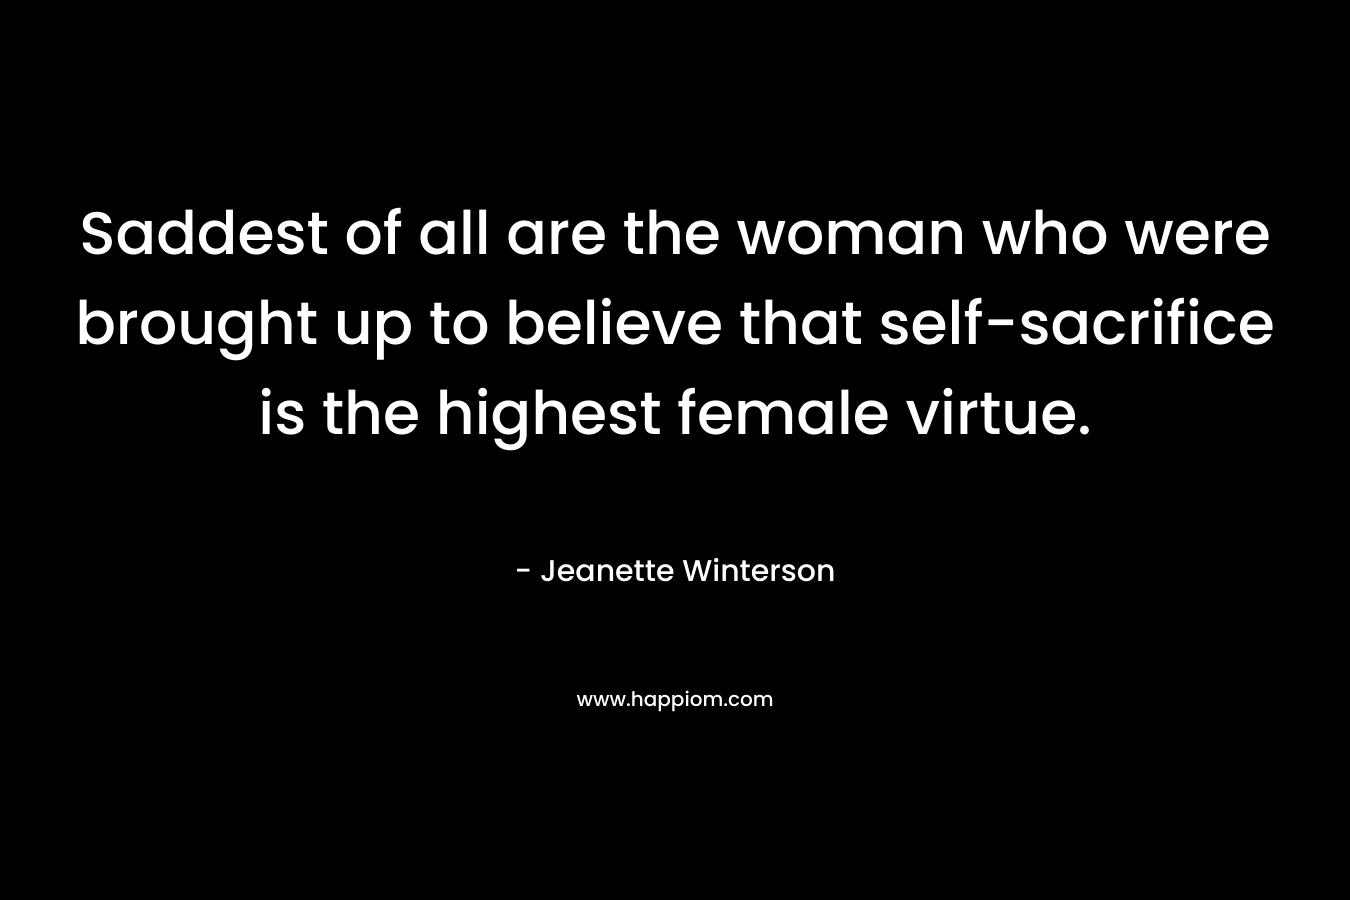 Saddest of all are the woman who were brought up to believe that self-sacrifice is the highest female virtue.